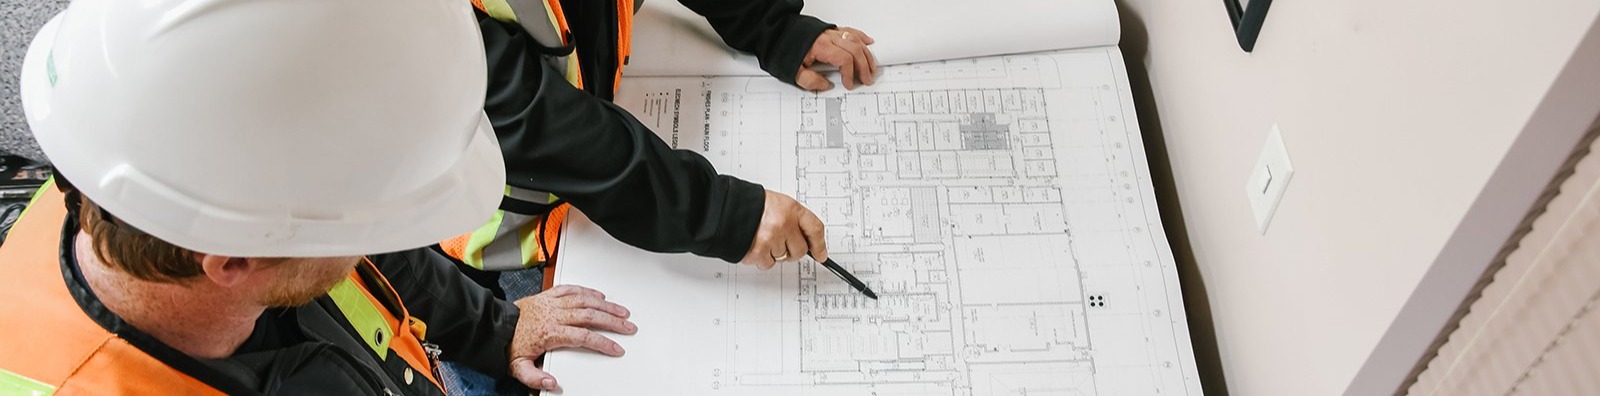 two people looking at construction plans